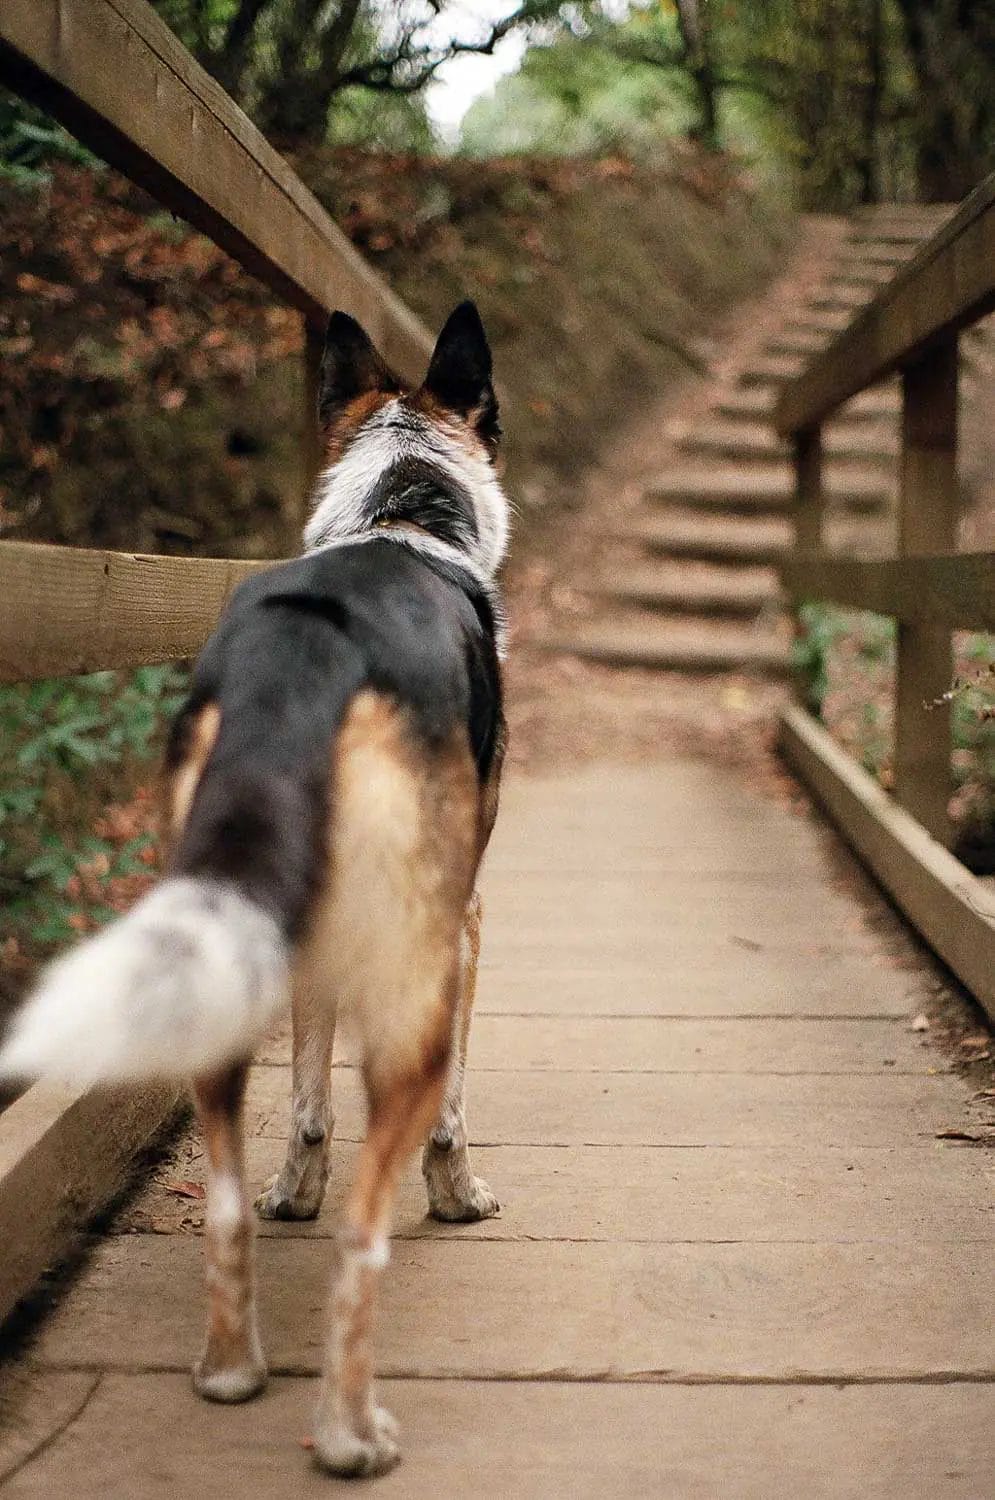 A dog standing on a wooden walkway looking ahead, surrounded by lush greenery.